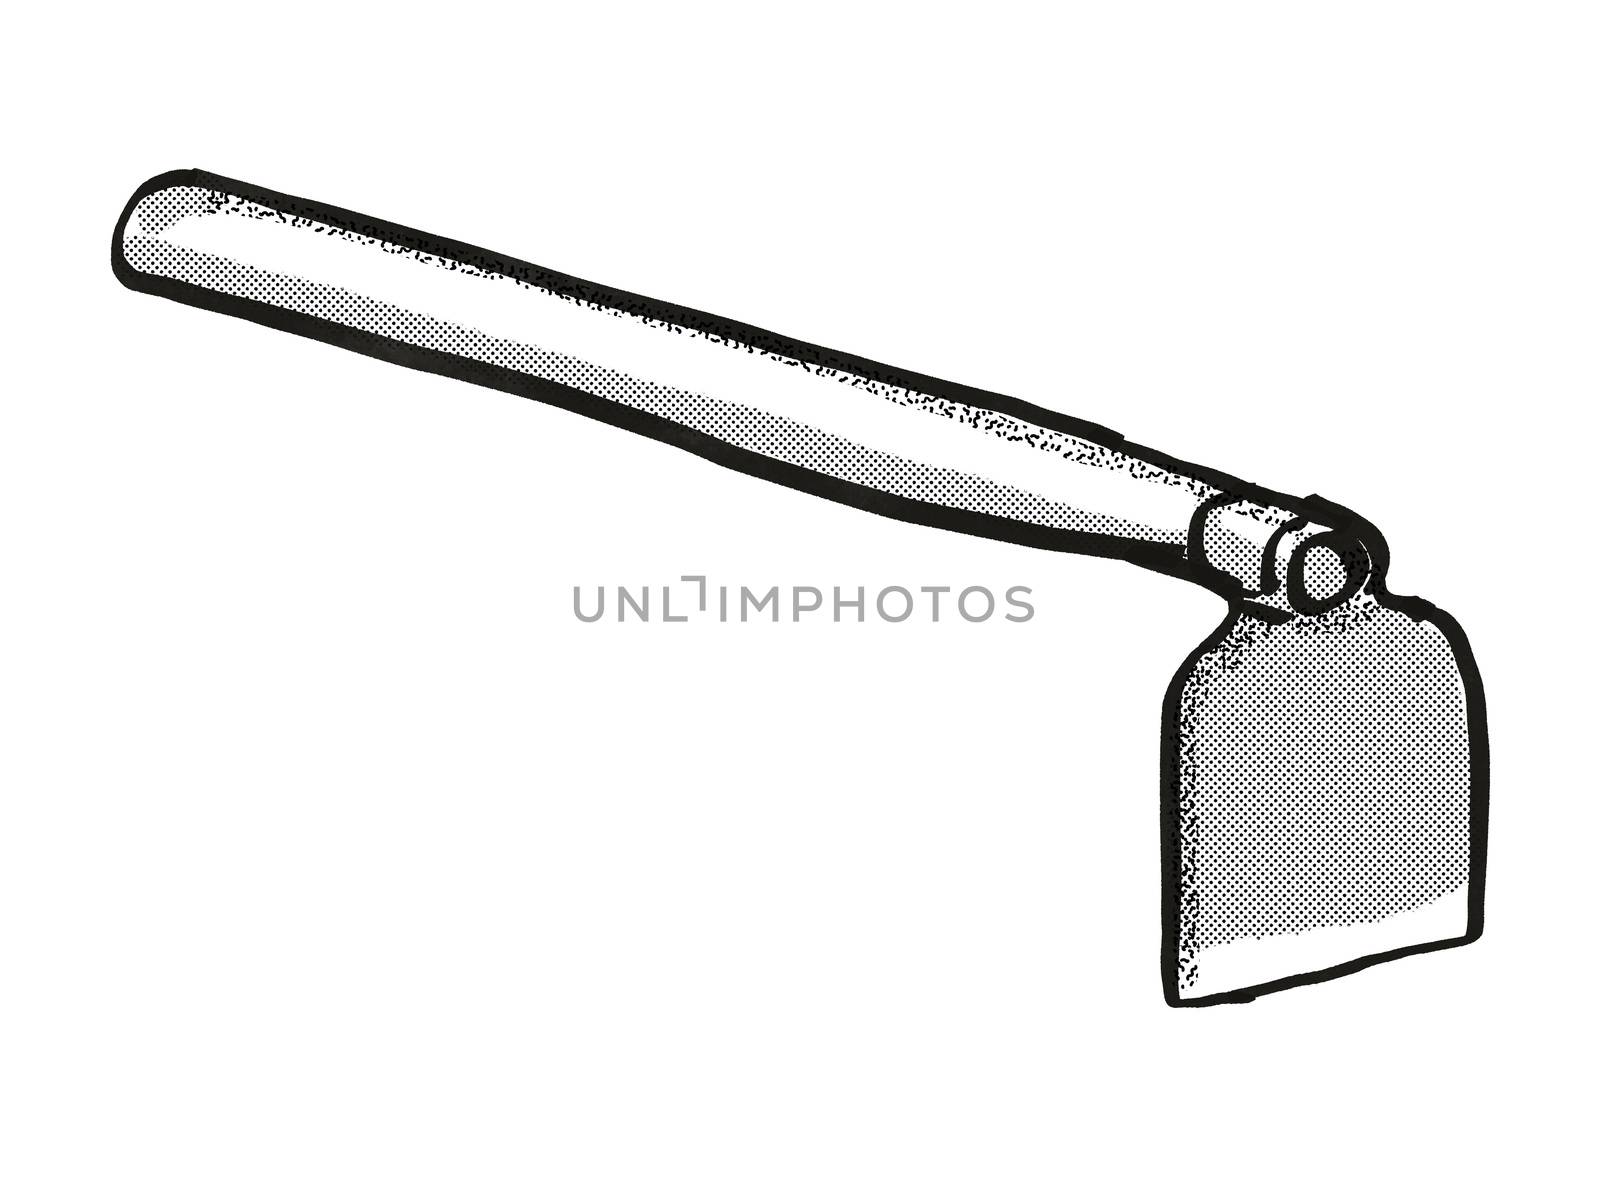 Retro cartoon style drawing of a grub hoe or grab hoe, a garden or gardening tool equipment on isolated white background done in black and white